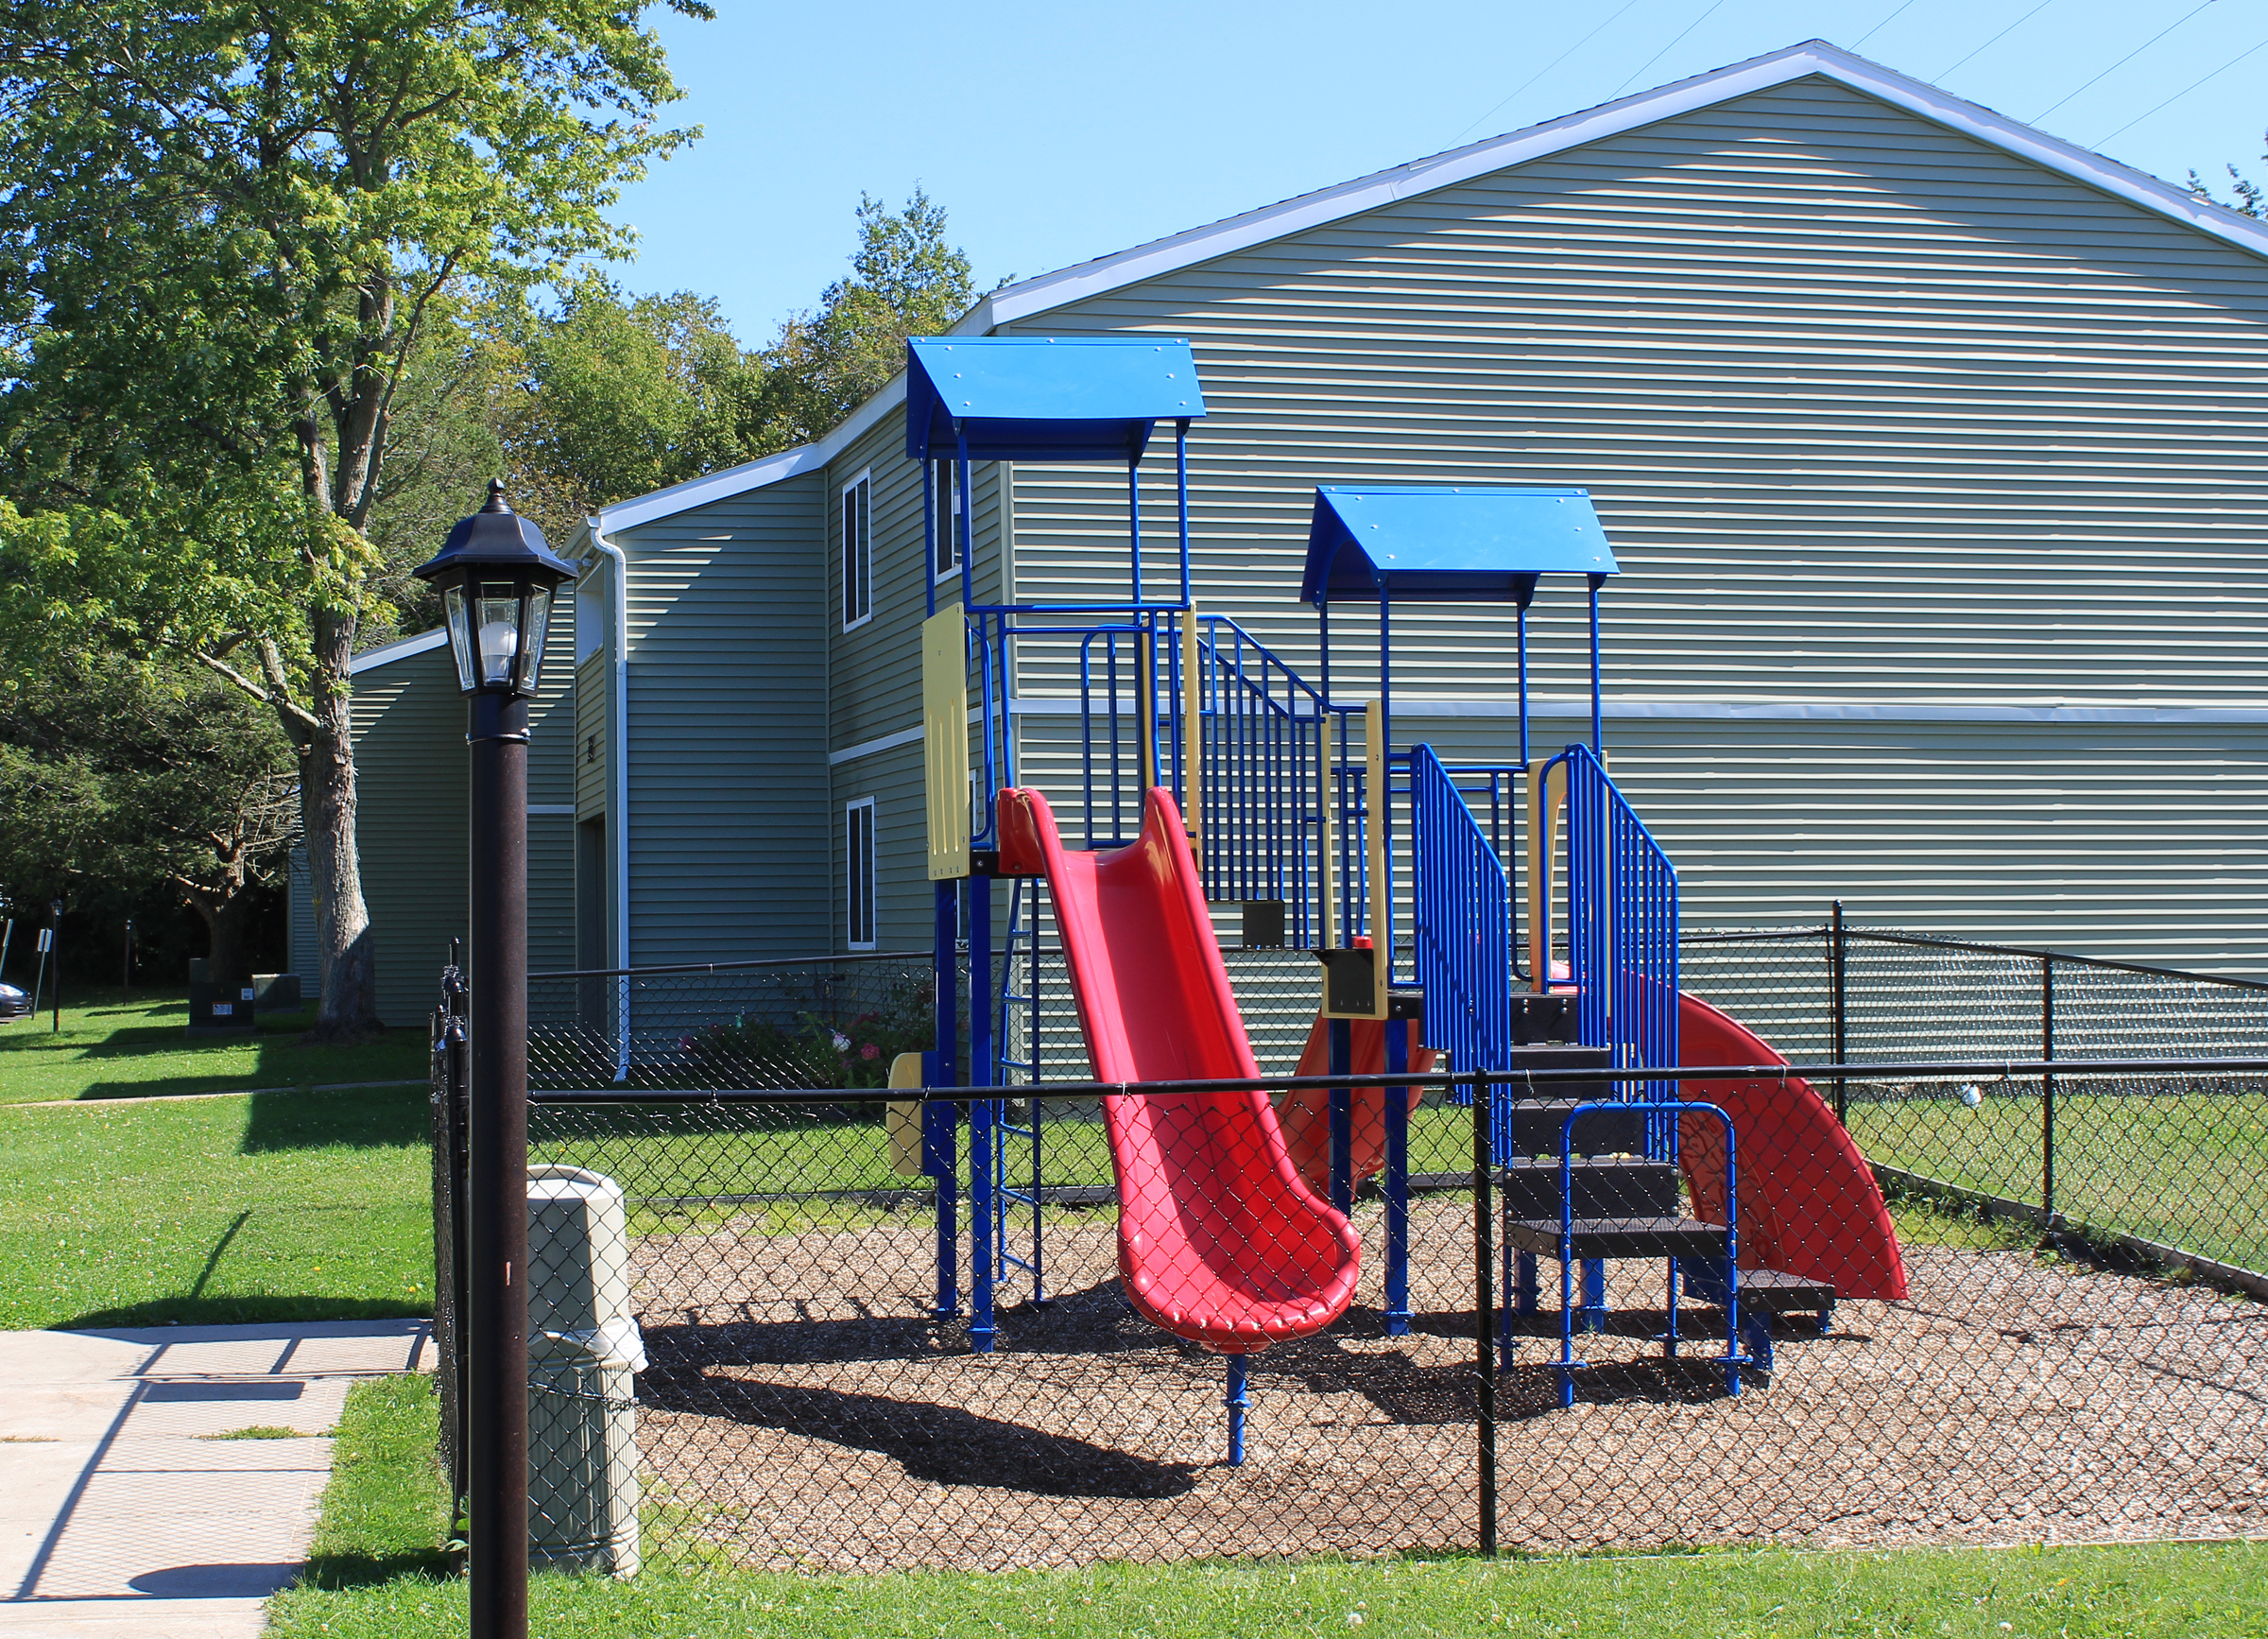 property management company client list syracuse ny playground image of wine creek apartments